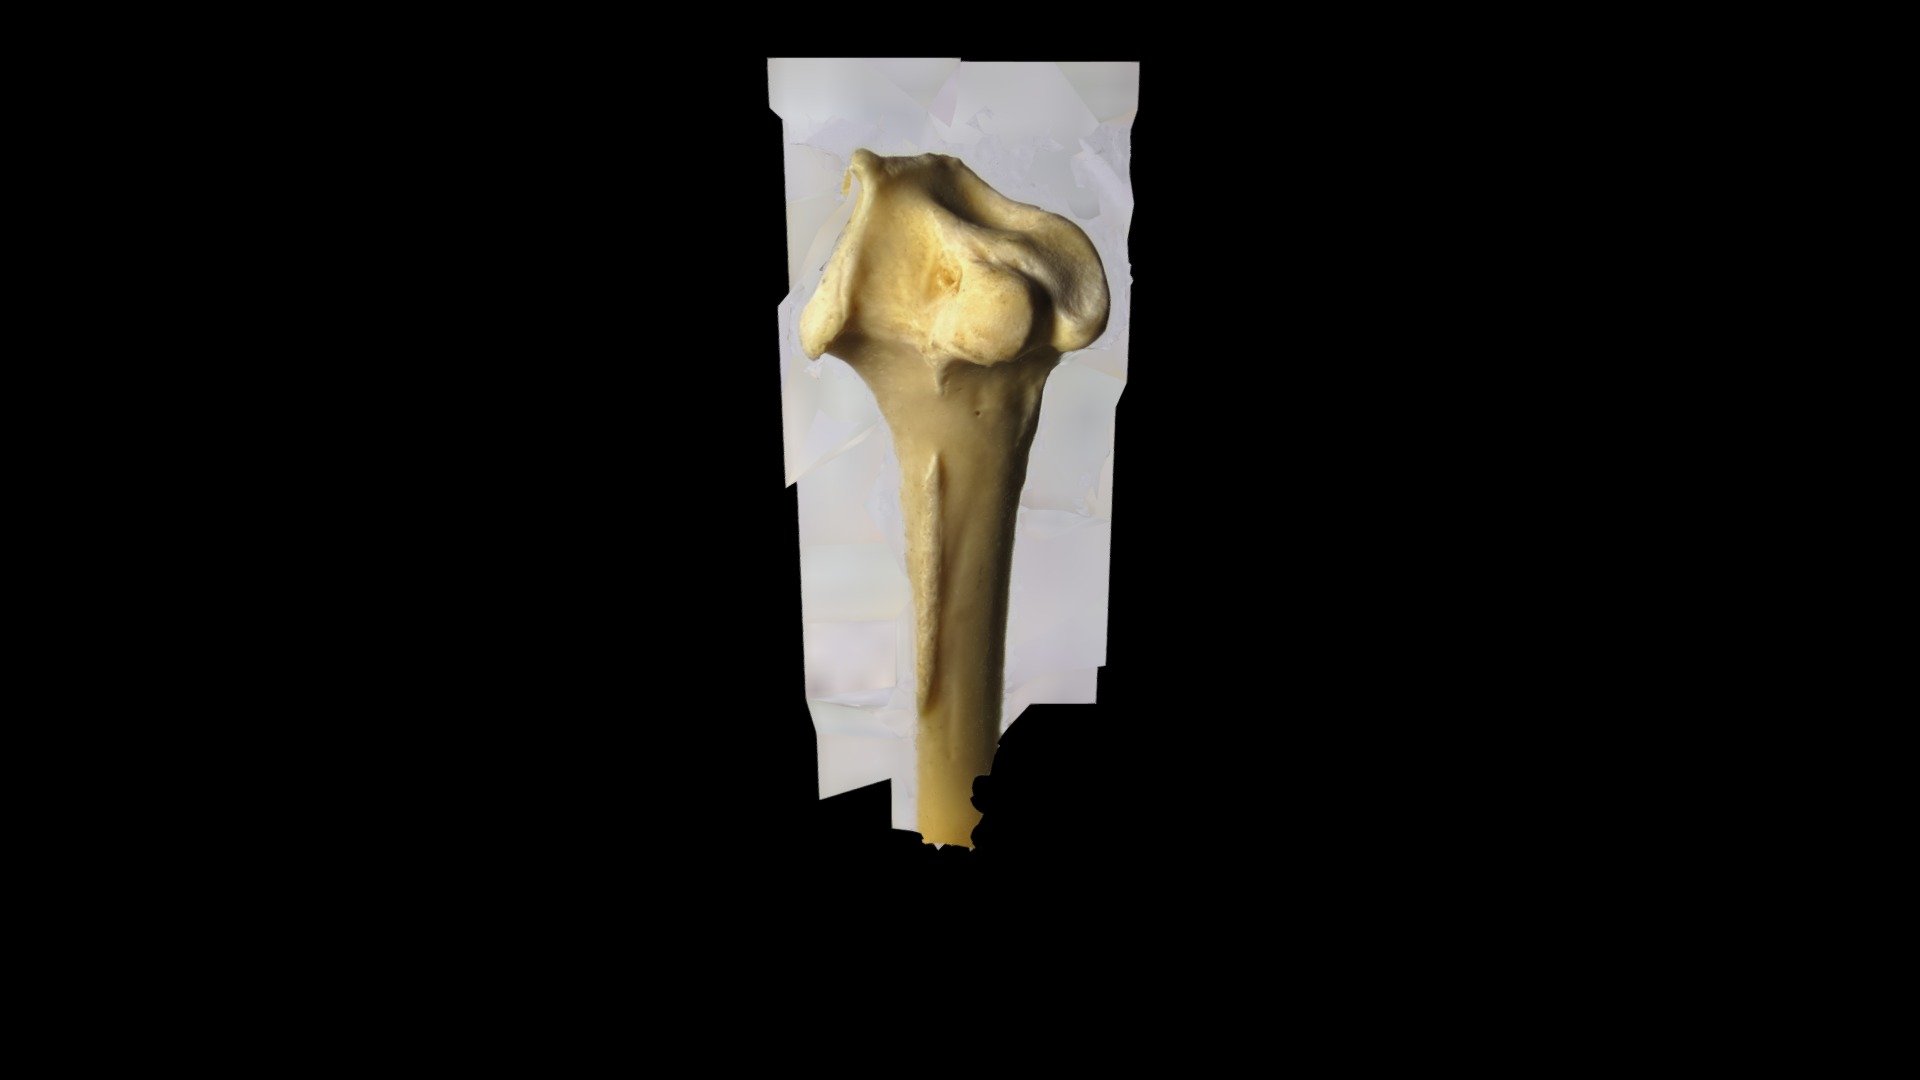 Tibiotarsus of a healthy chicken, knee joint